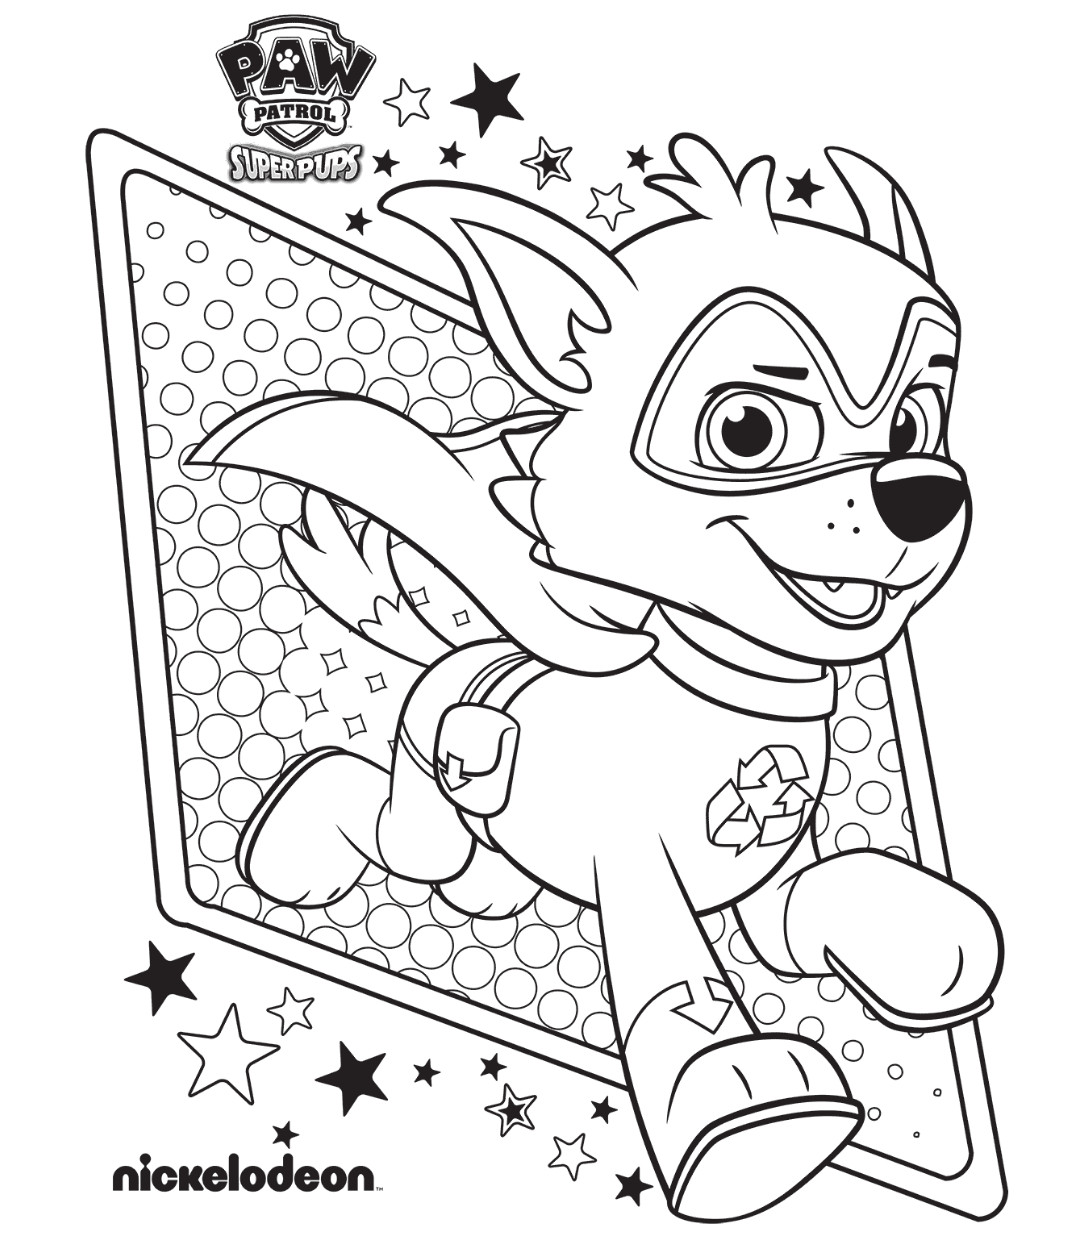 Dog Coloring Pages For Boys
 New PAW Patrol Super Pups Coloring Page